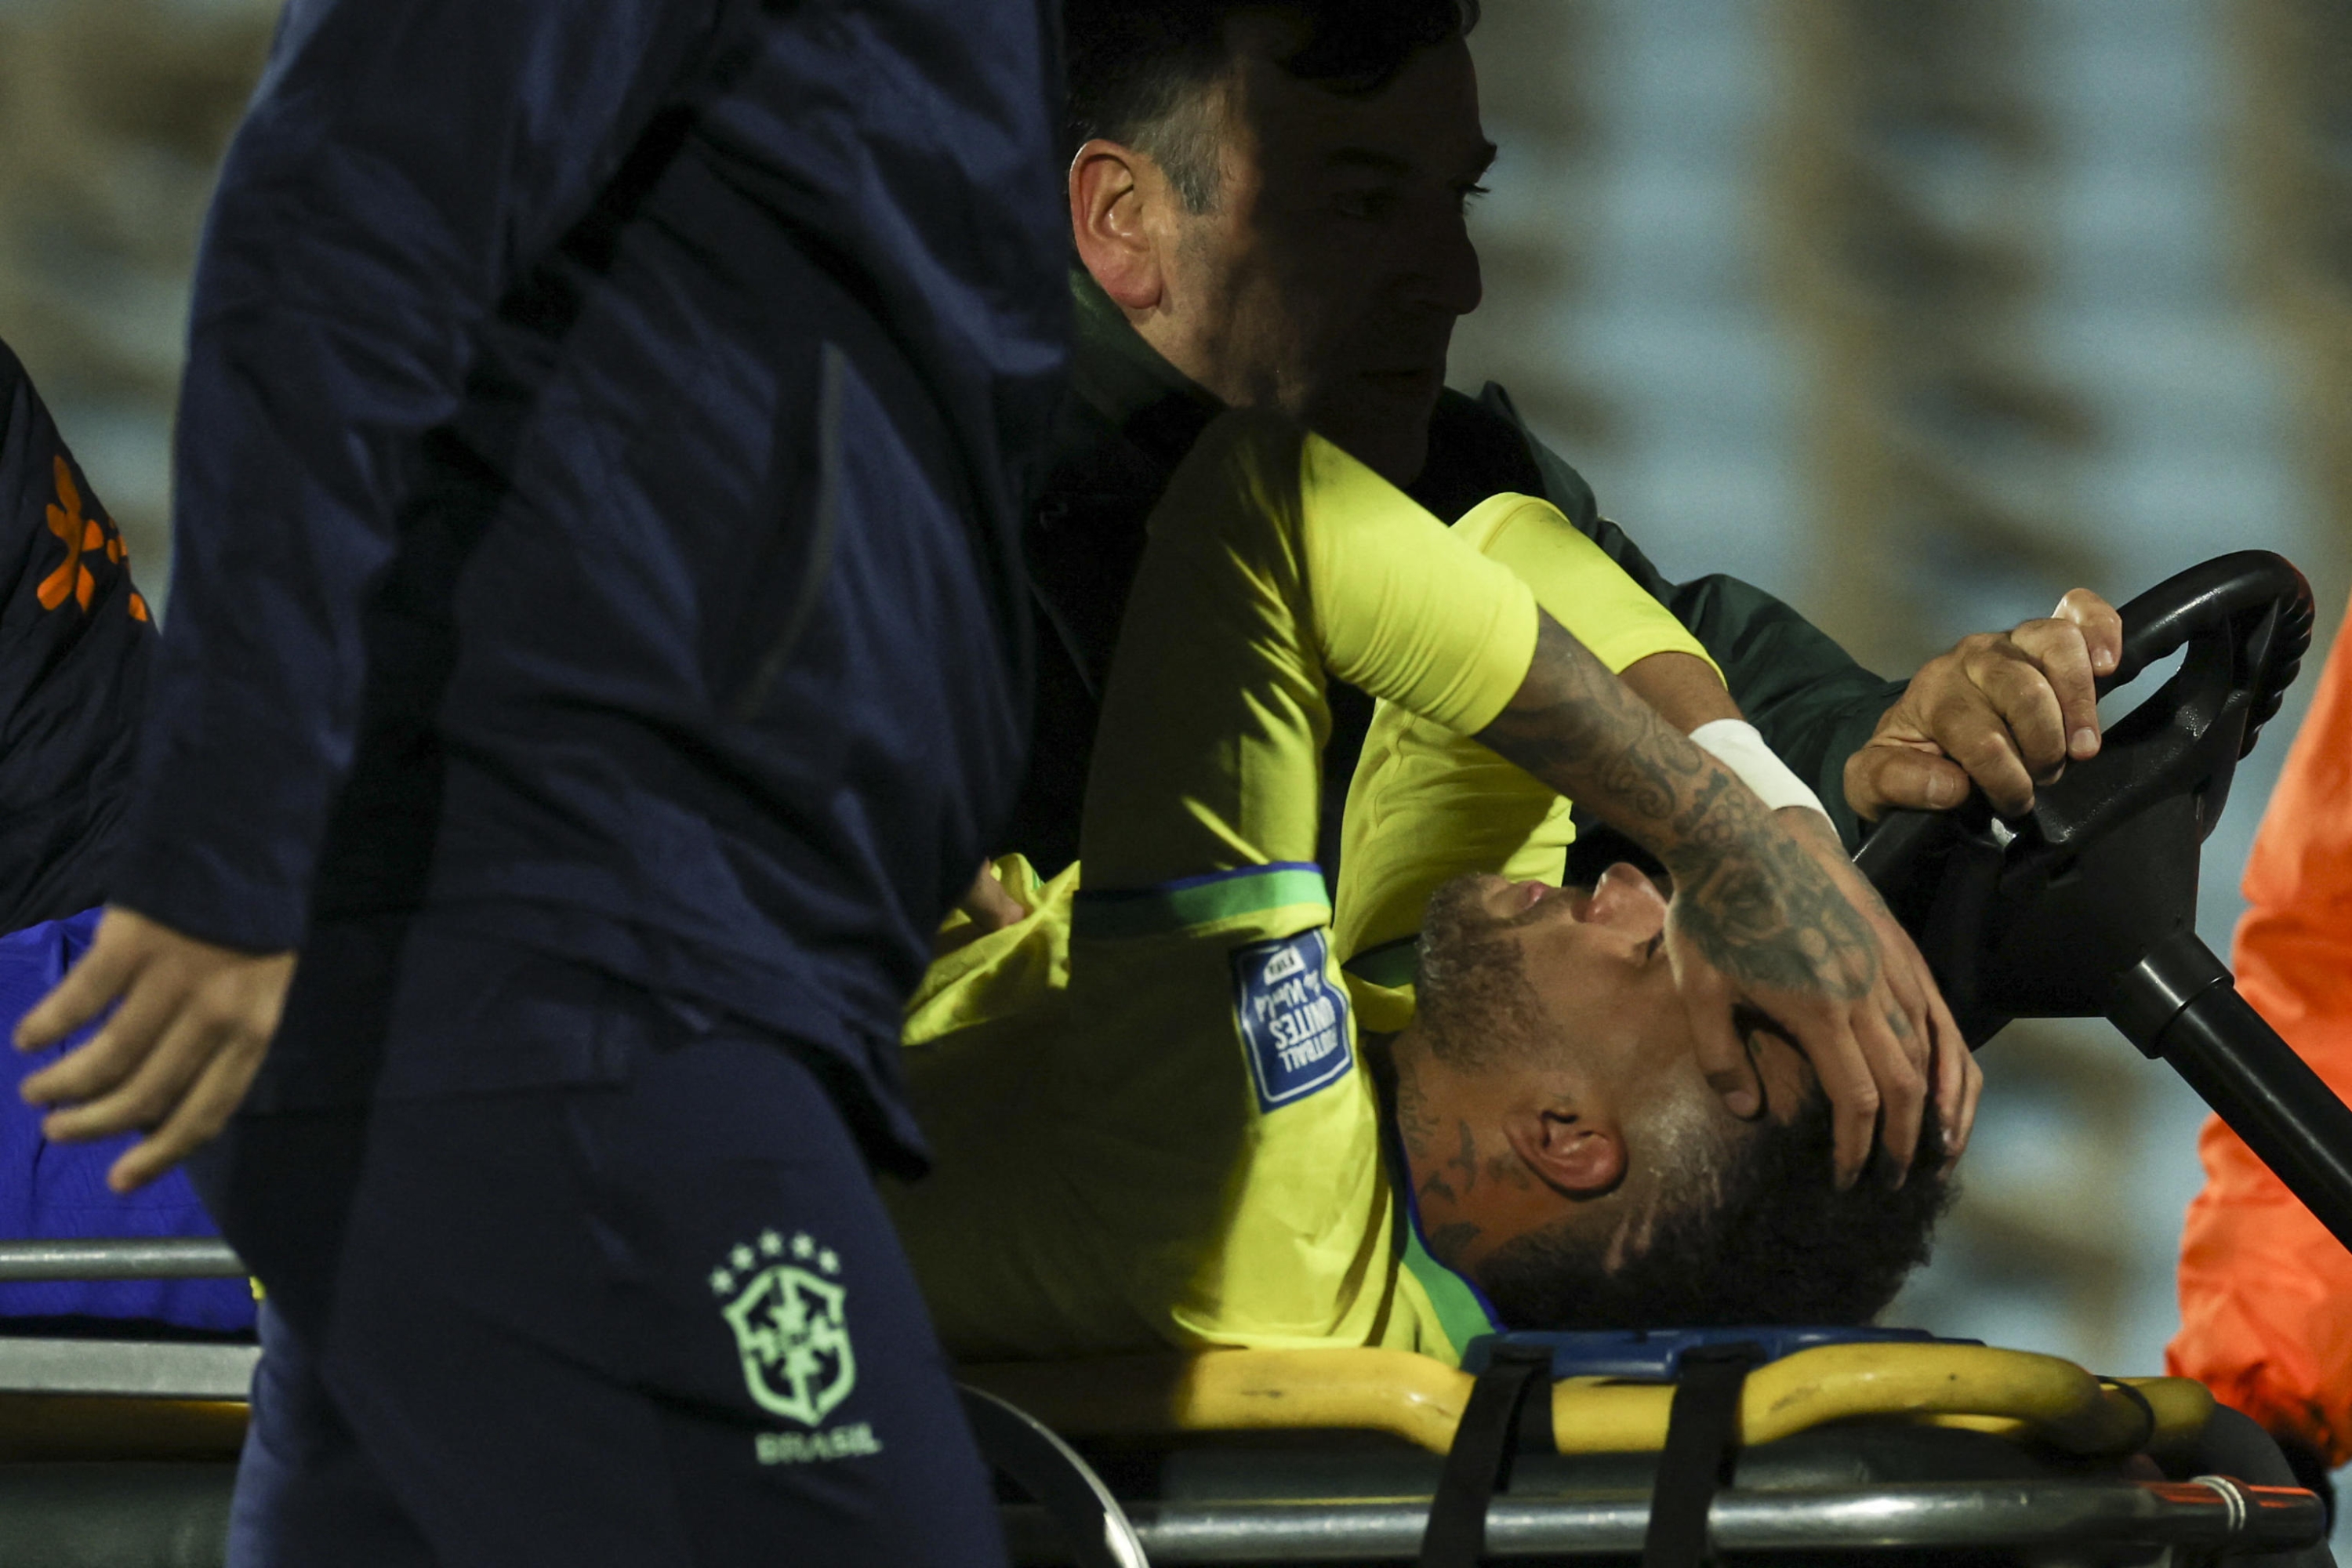 Brazil's forward Neymar leaves the field crying in pain after an injury during the 2026 FIFA World Cup South American qualification football match between Uruguay and Brazil at the Centenario Stadium in Montevideo on October 17, 2023. Football superstar Neymar has a torn ligament and meniscus in his left knee and will have to undergo surgery after being injured during Brazil's 2-0 loss to Uruguay, the Brazilian Football Confederation (CBF) said on October 18. (Photo by Pablo PORCIUNCULA / AFP)